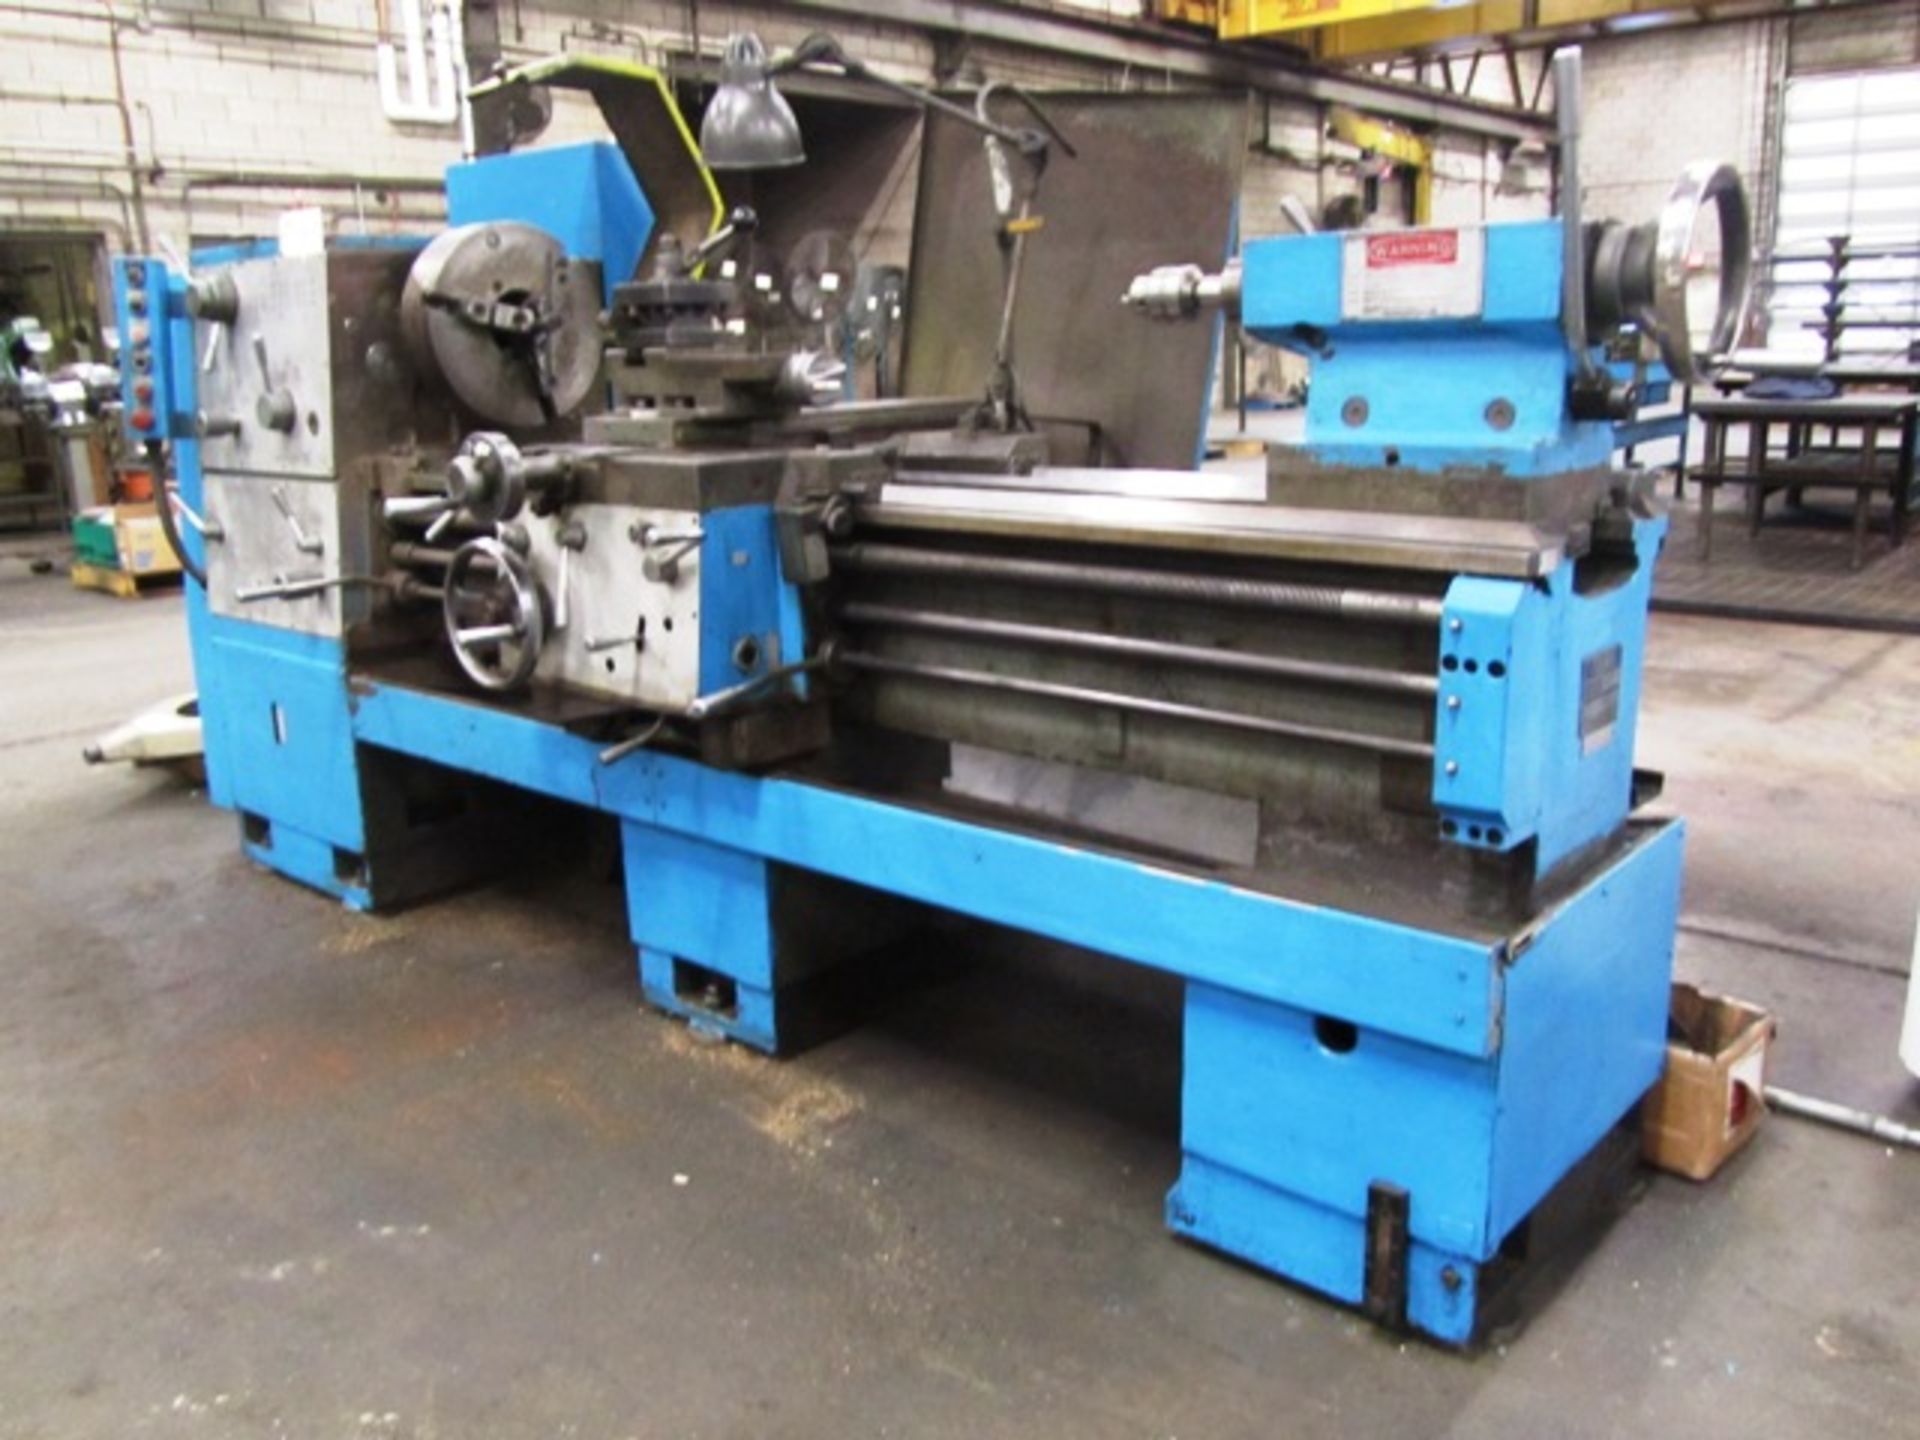 Toolmex Model TUR-560 22'' x 60'' Manual Lathe with Taper Attachment, 15'' 3-Jaw Chuck, Tailstock, - Image 2 of 2